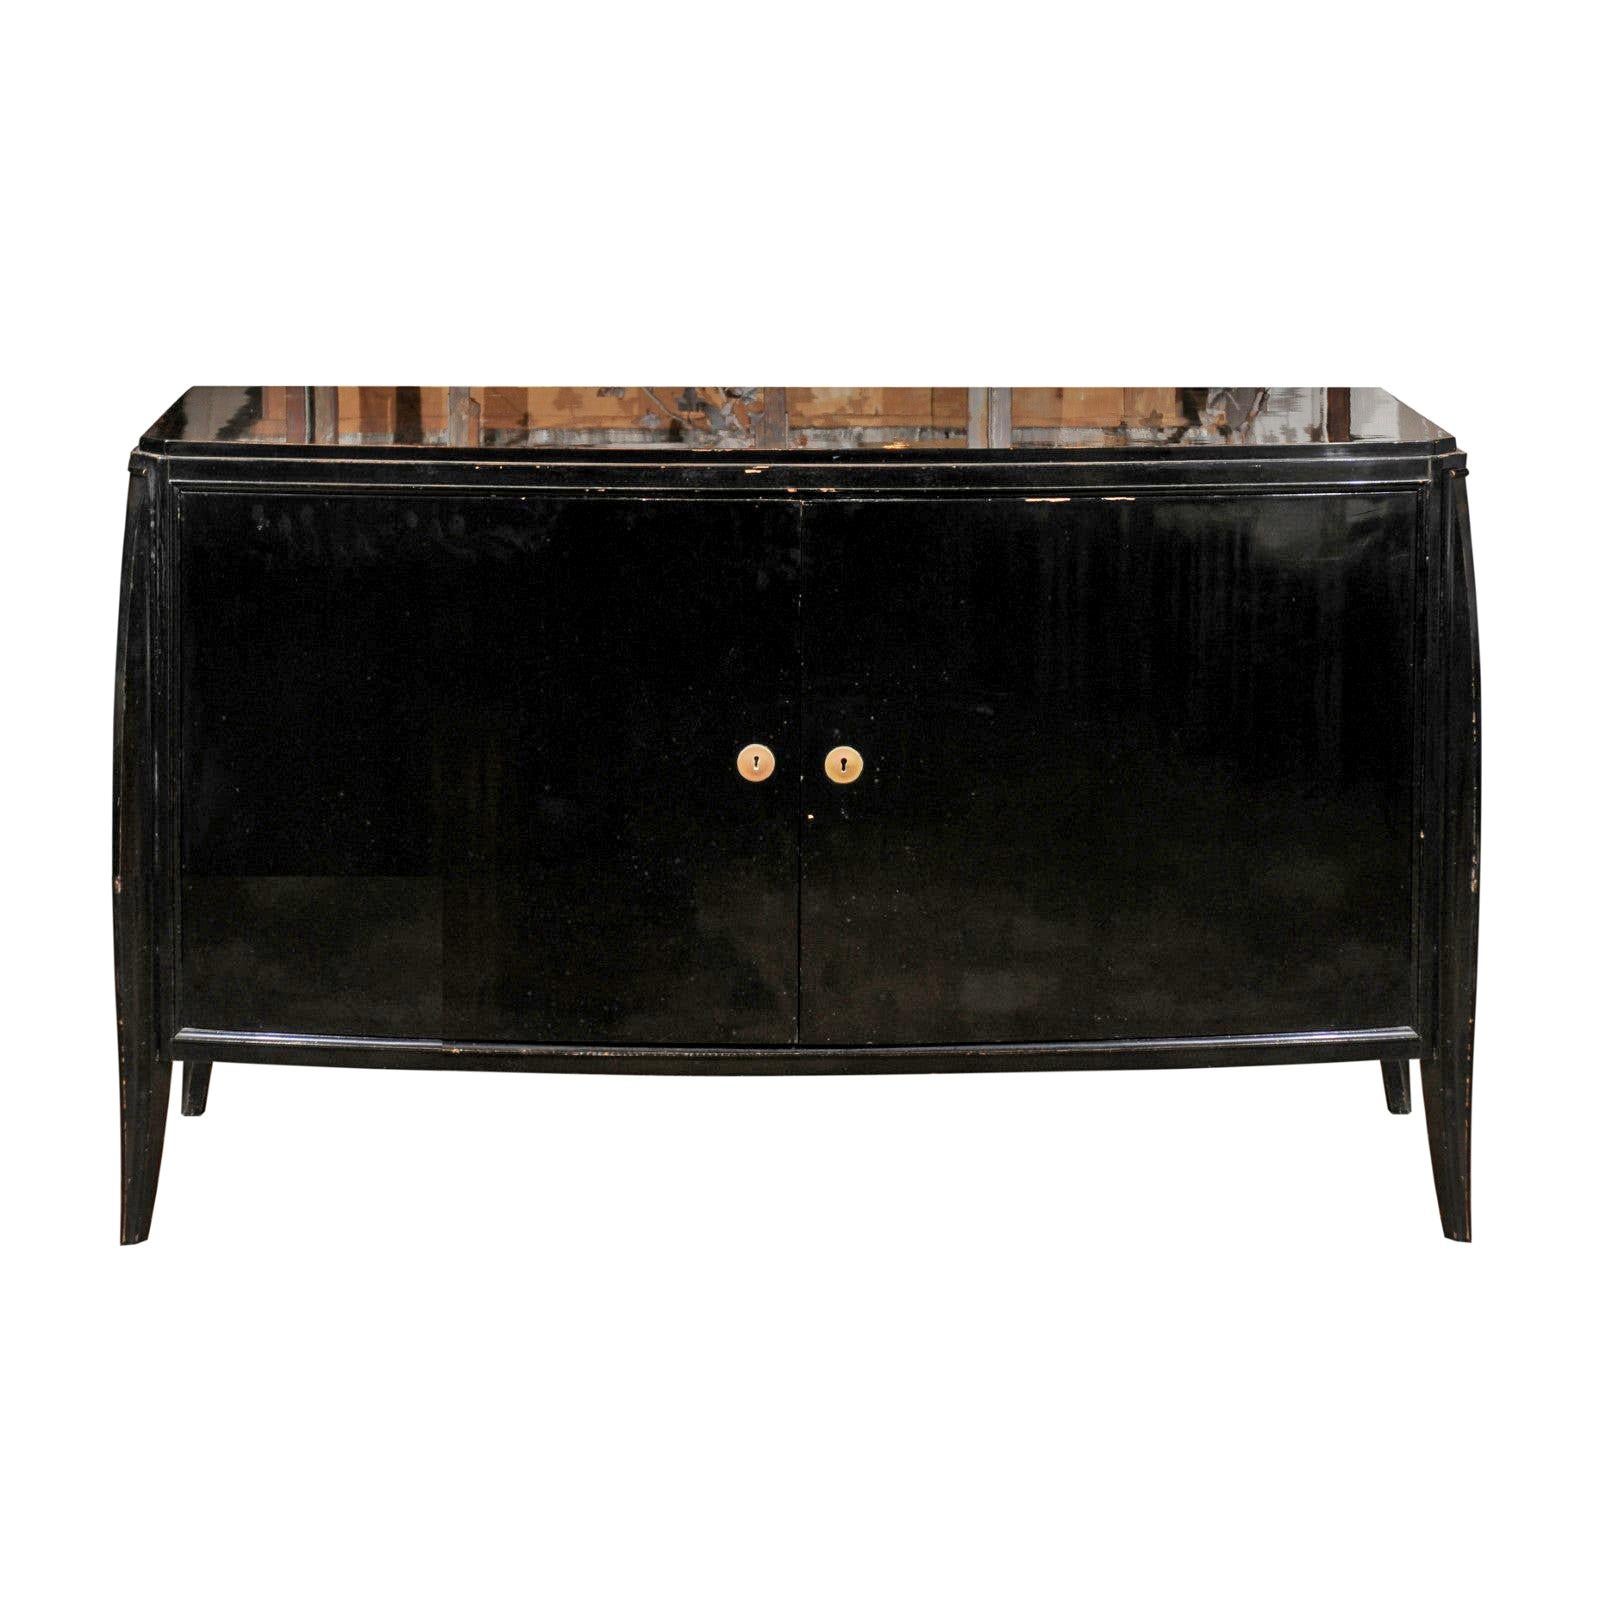 Parisian 1960s Black Lacquered Bow Front Two-Door Cabinet with Splaying Legs For Sale